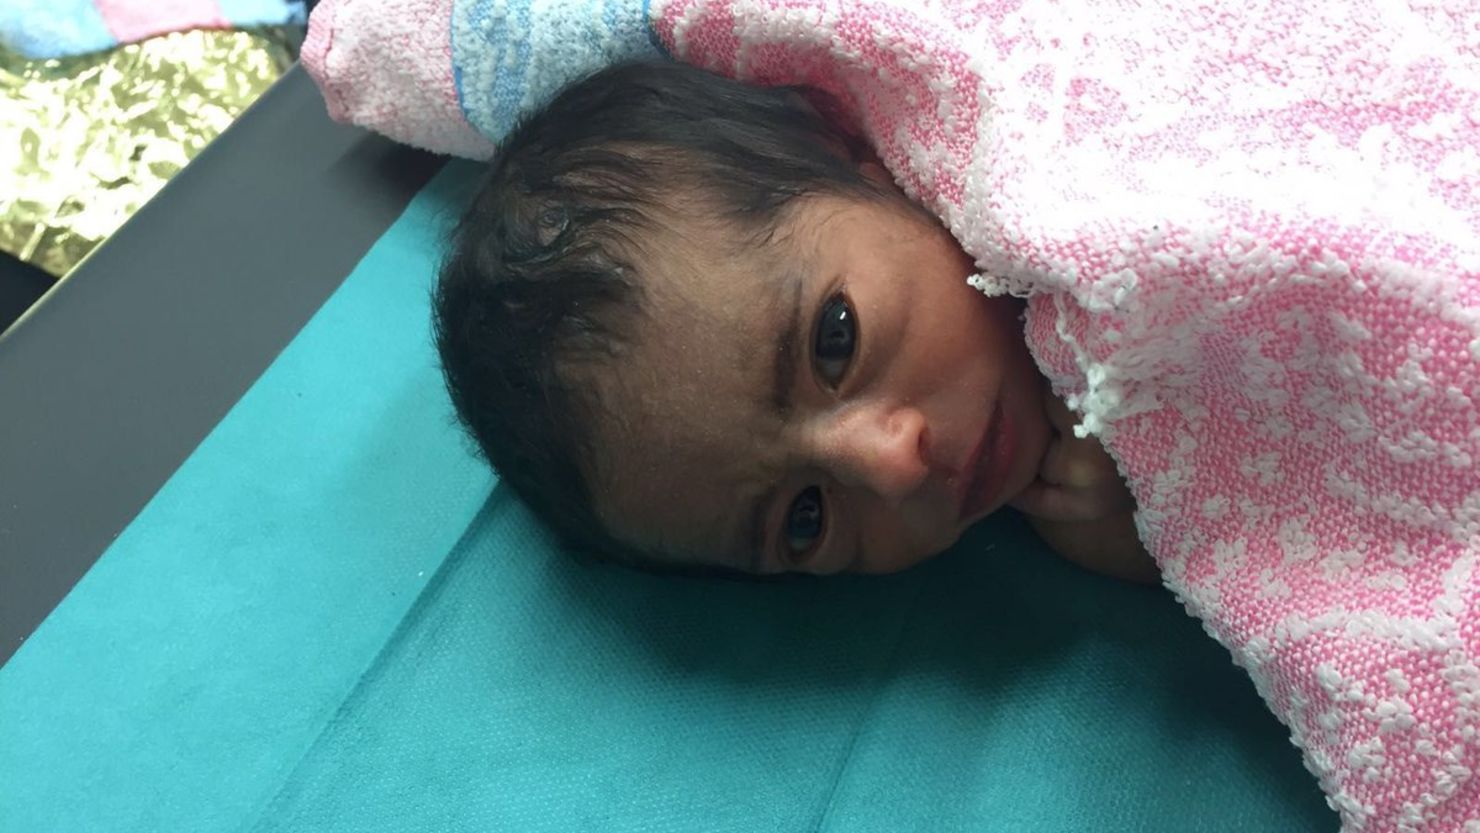 This newborn was among the nearly 7,000 people rescued on the Mediterranean Sea on Monday.